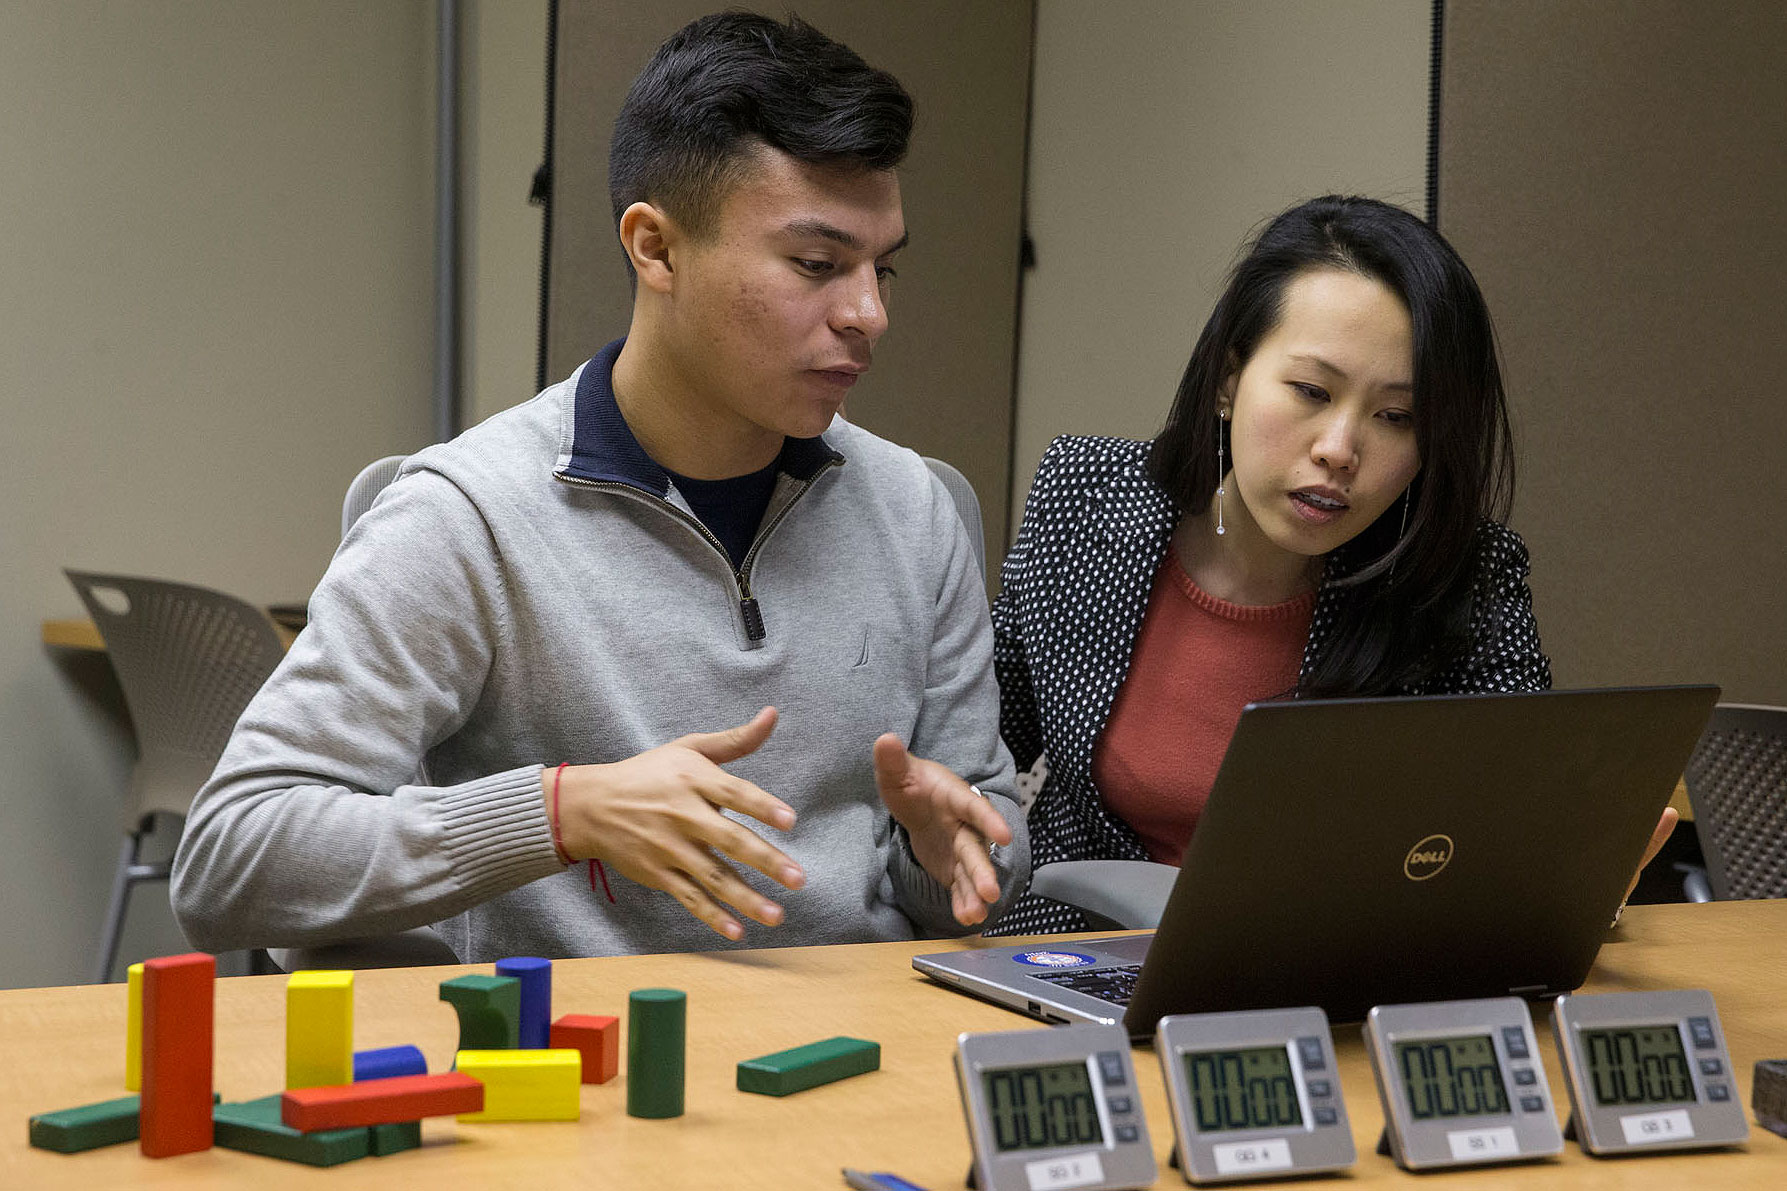 Hector Quijano and Eileen Chou, work on a computer together